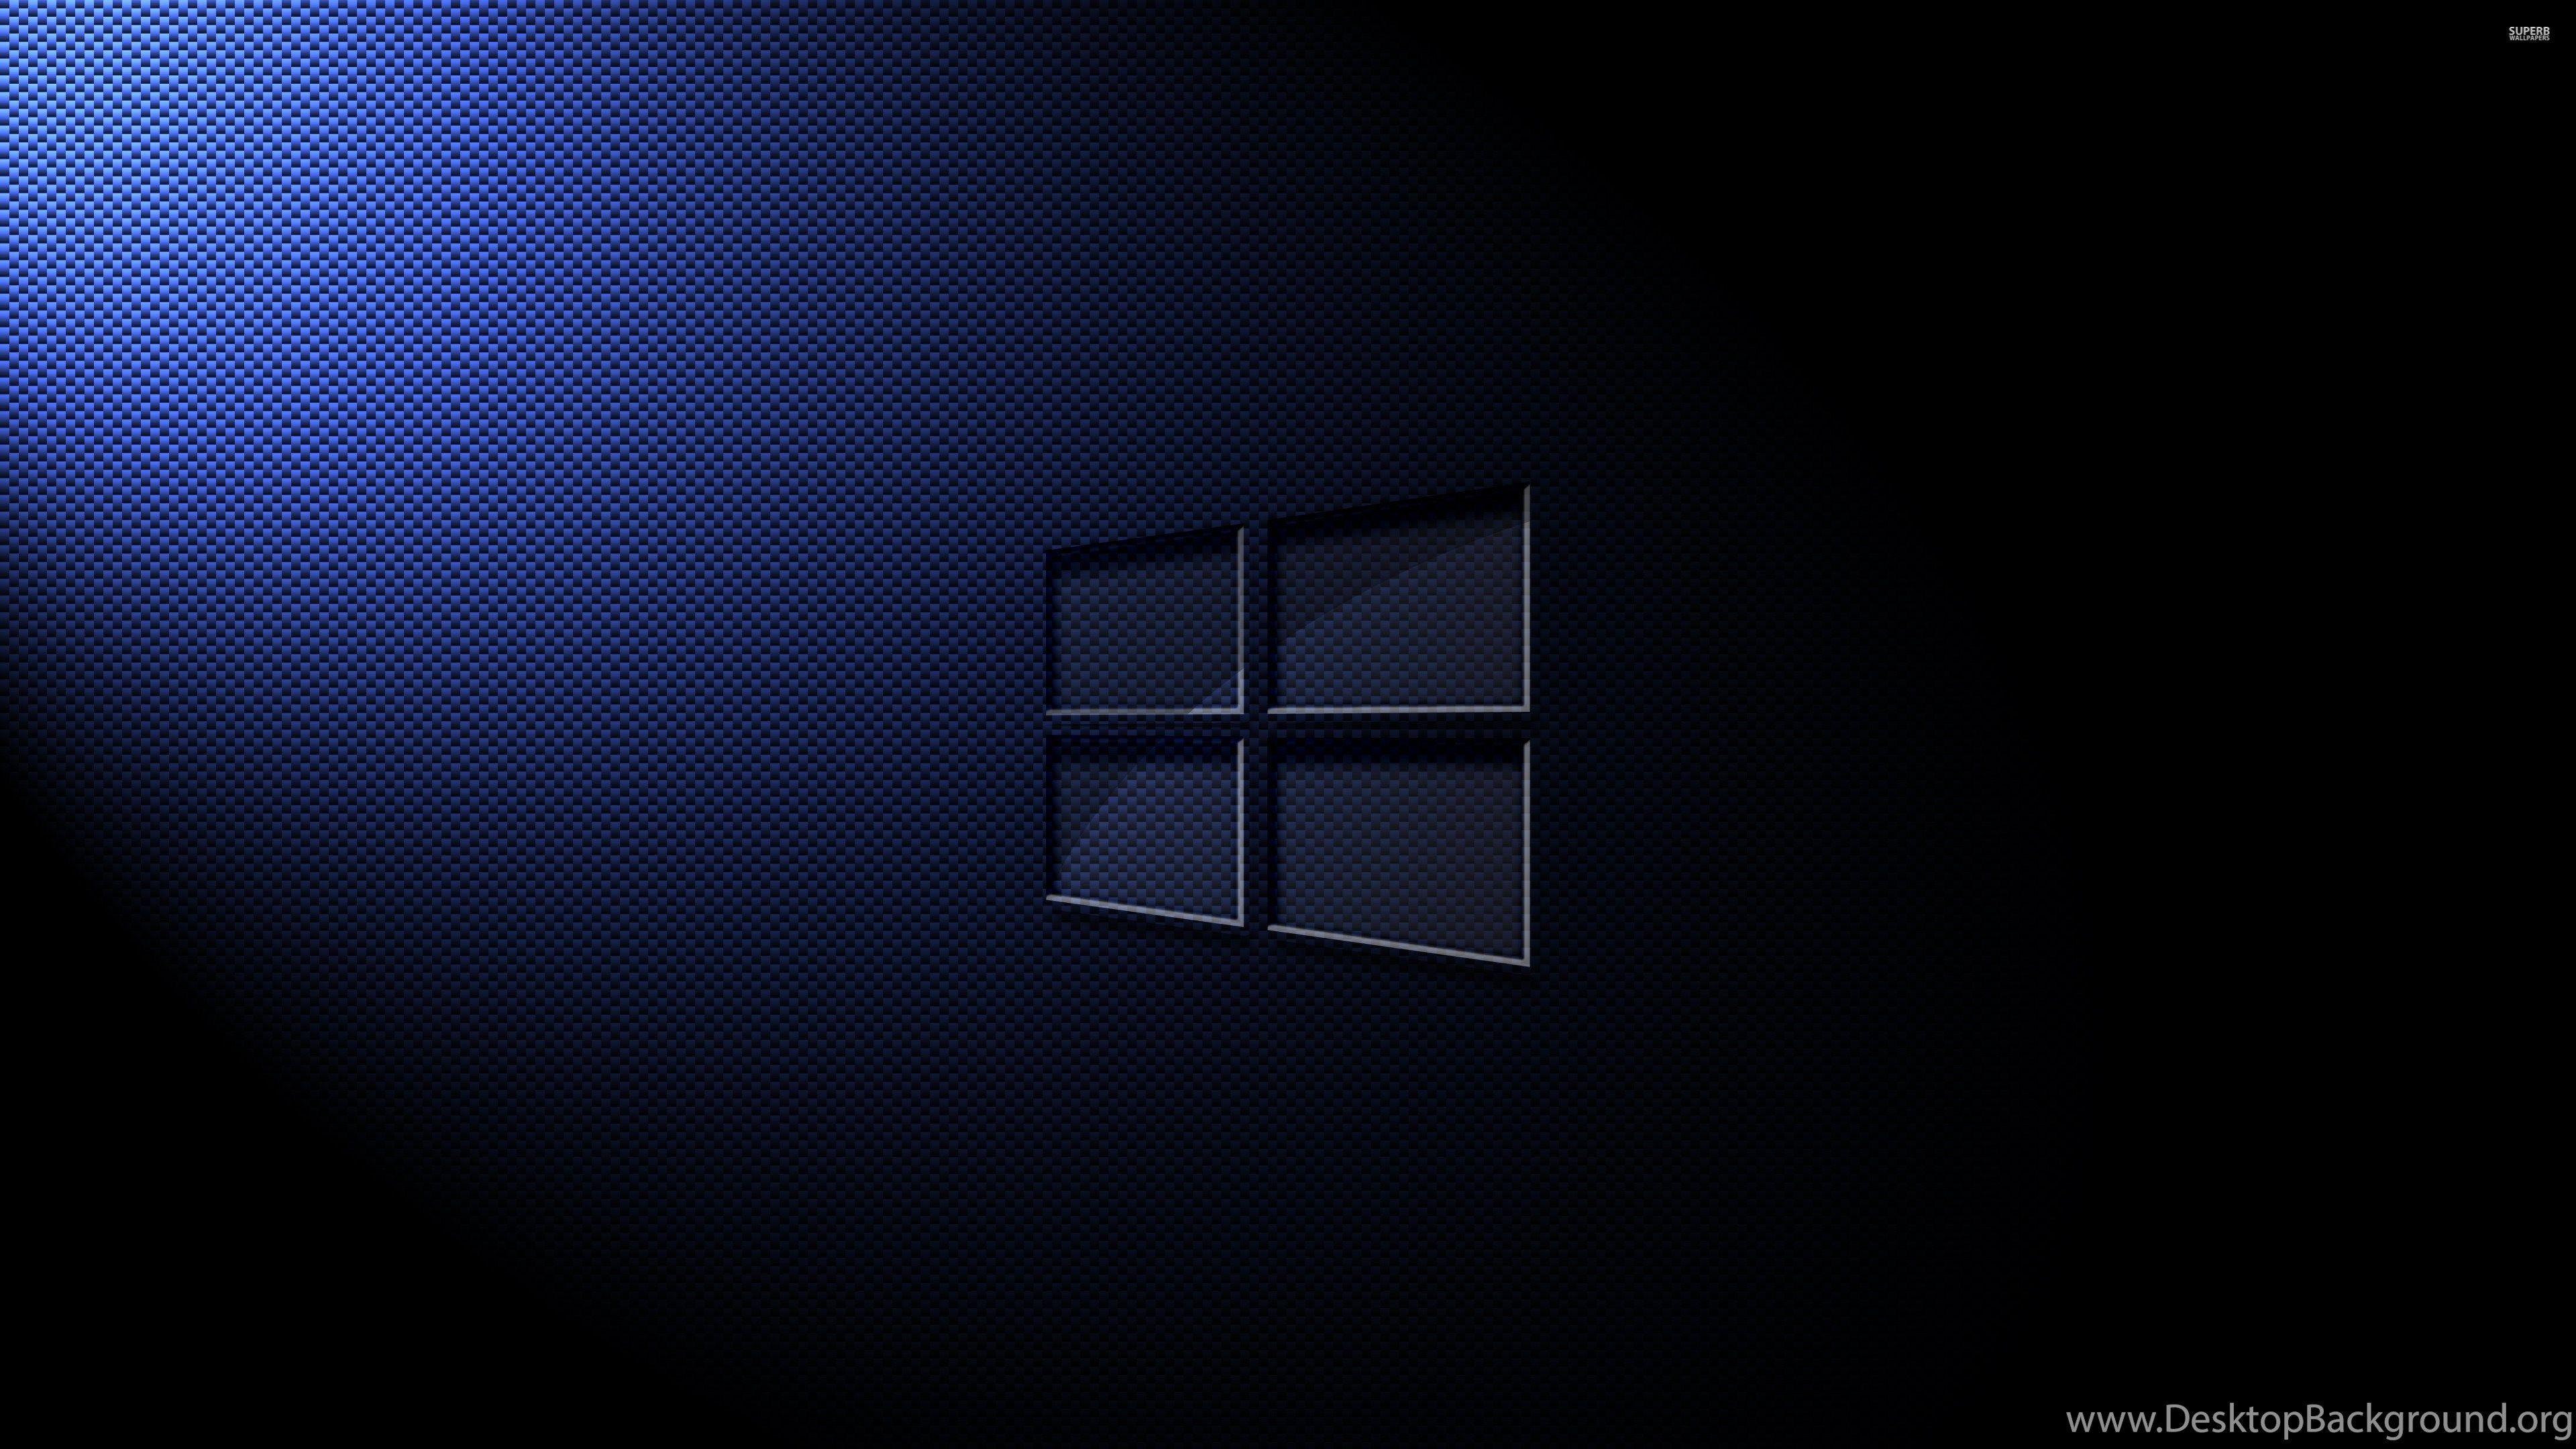 Windows 10 Blue Wallpapers - Top Free Windows 10 Blue Backgrounds ...